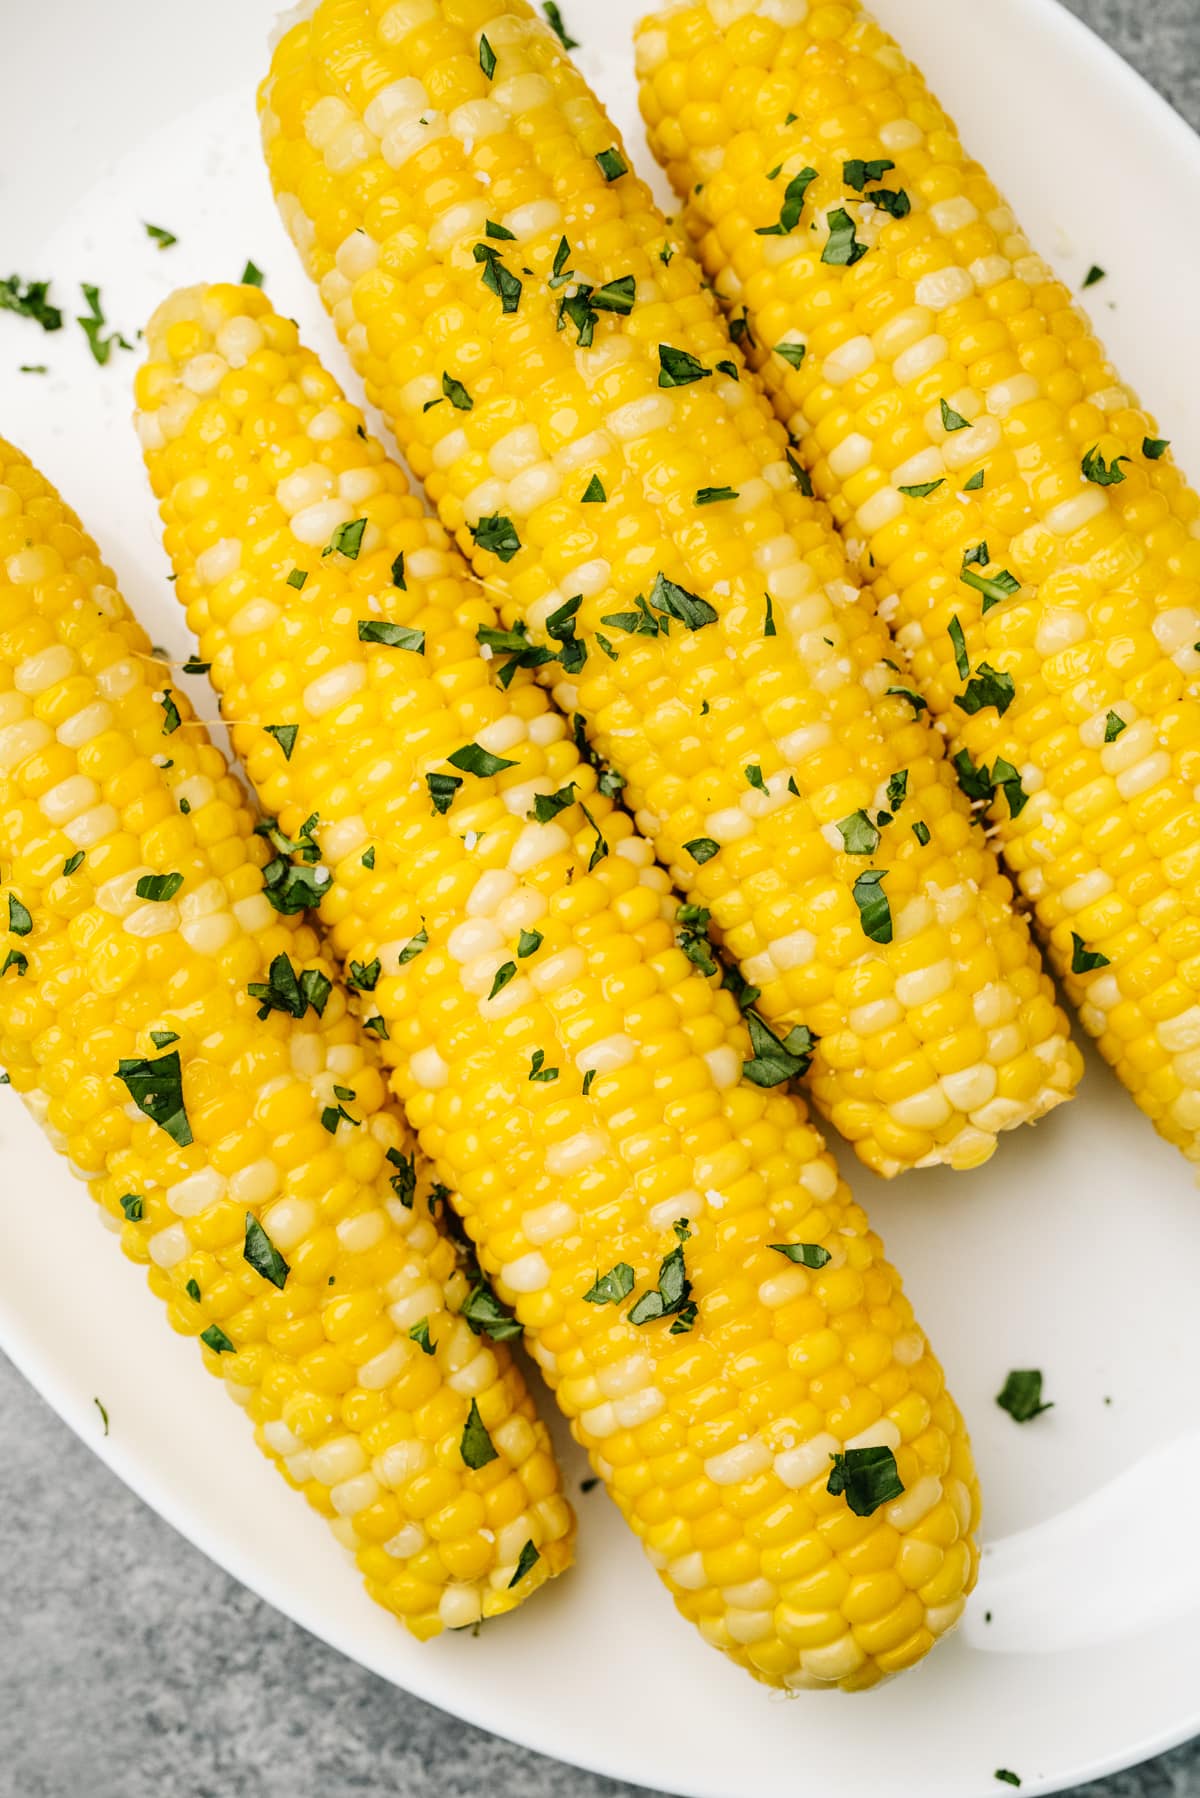 Four ears of cooked corn on the cob seasoned with butter and fresh herbs on a white plate.